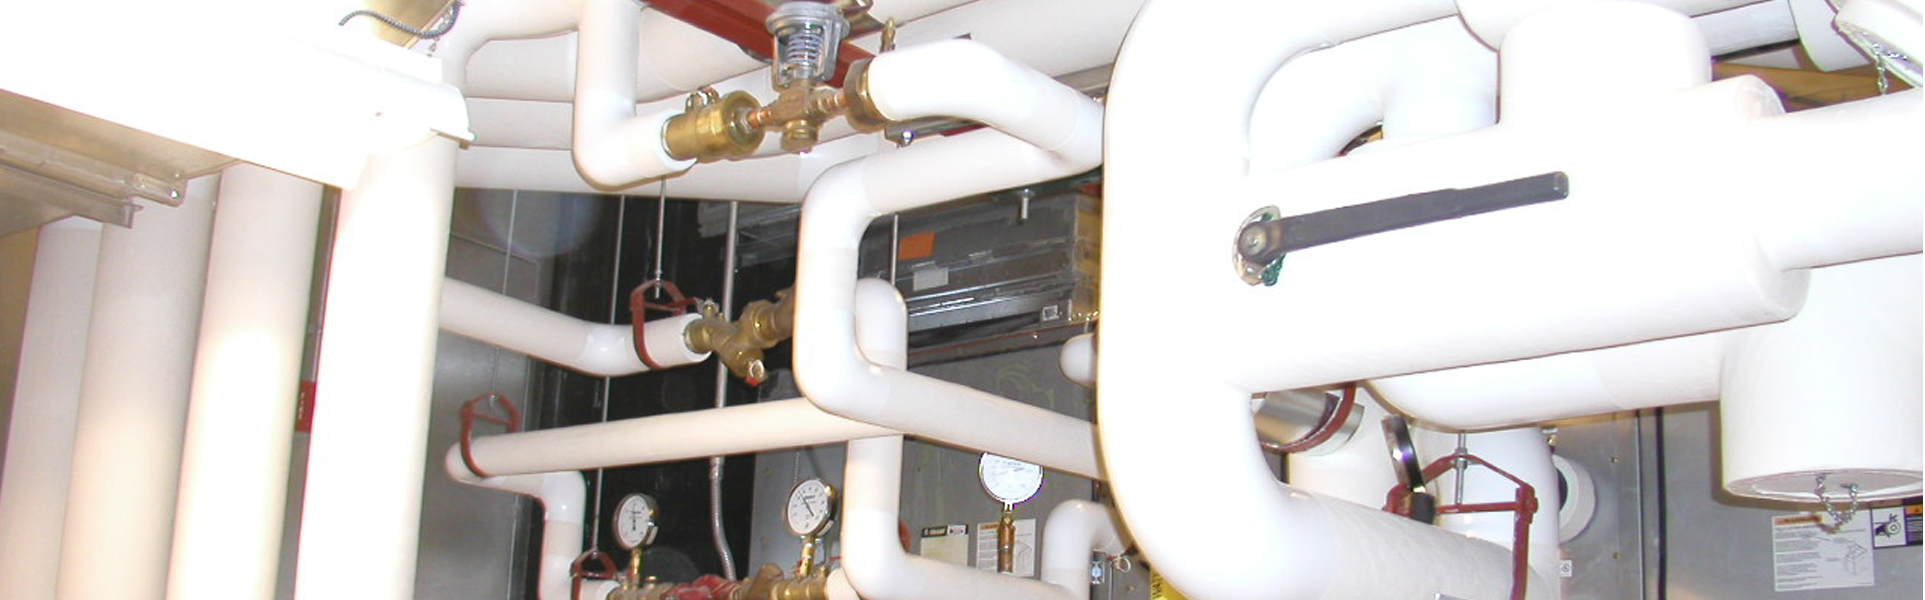 pressure gauges in a water treatment plant